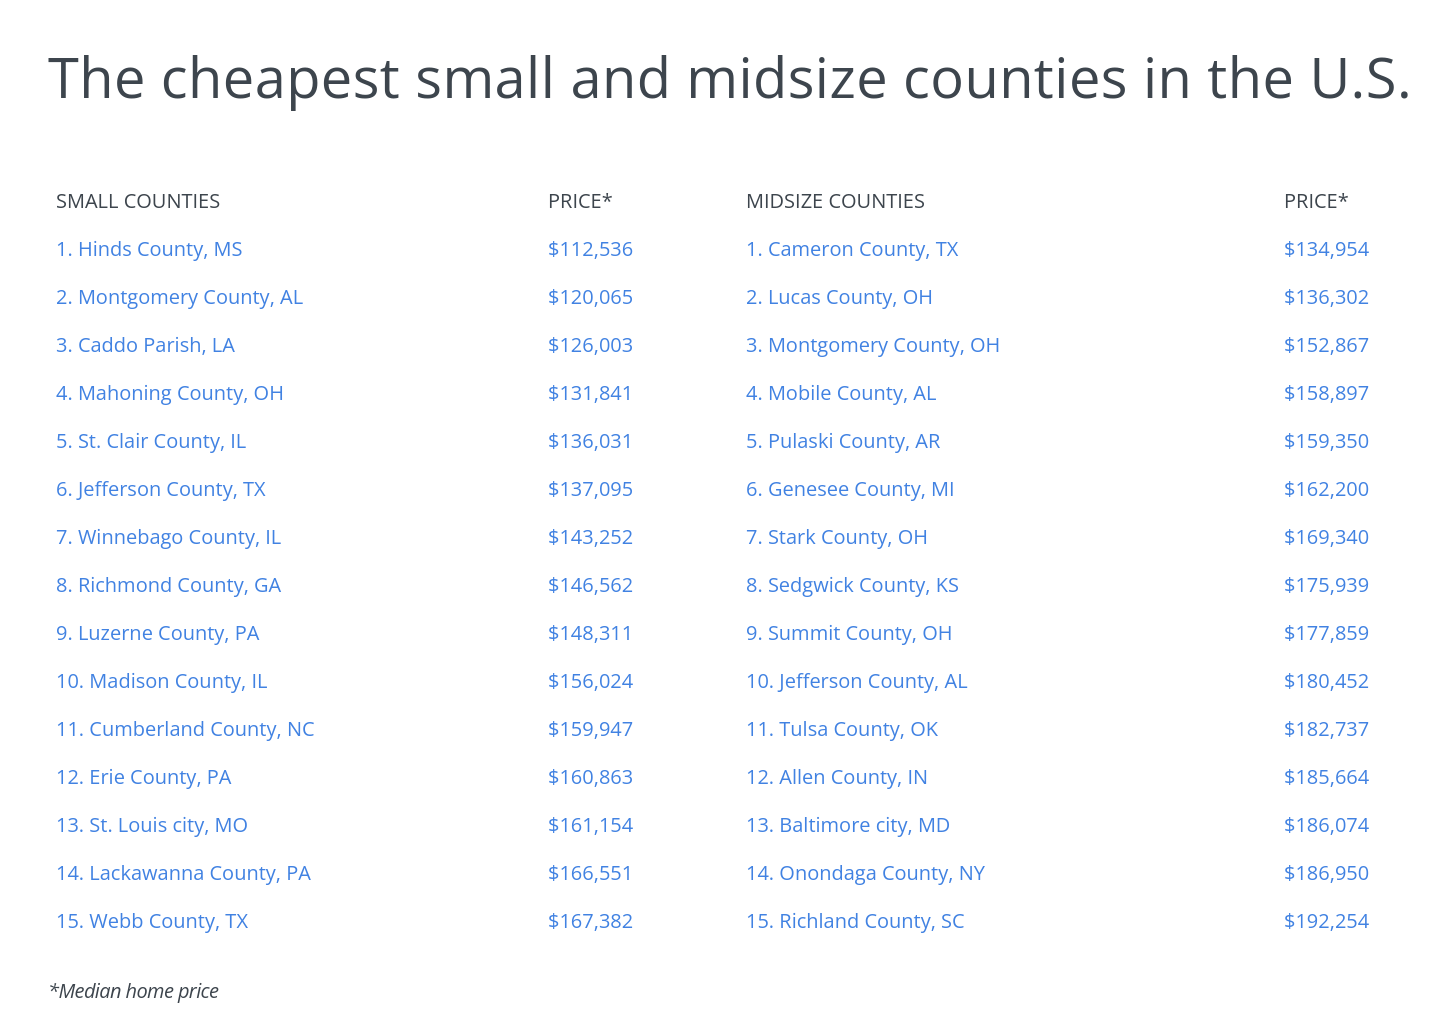 The cheapest small and midsize counties in the U.S.